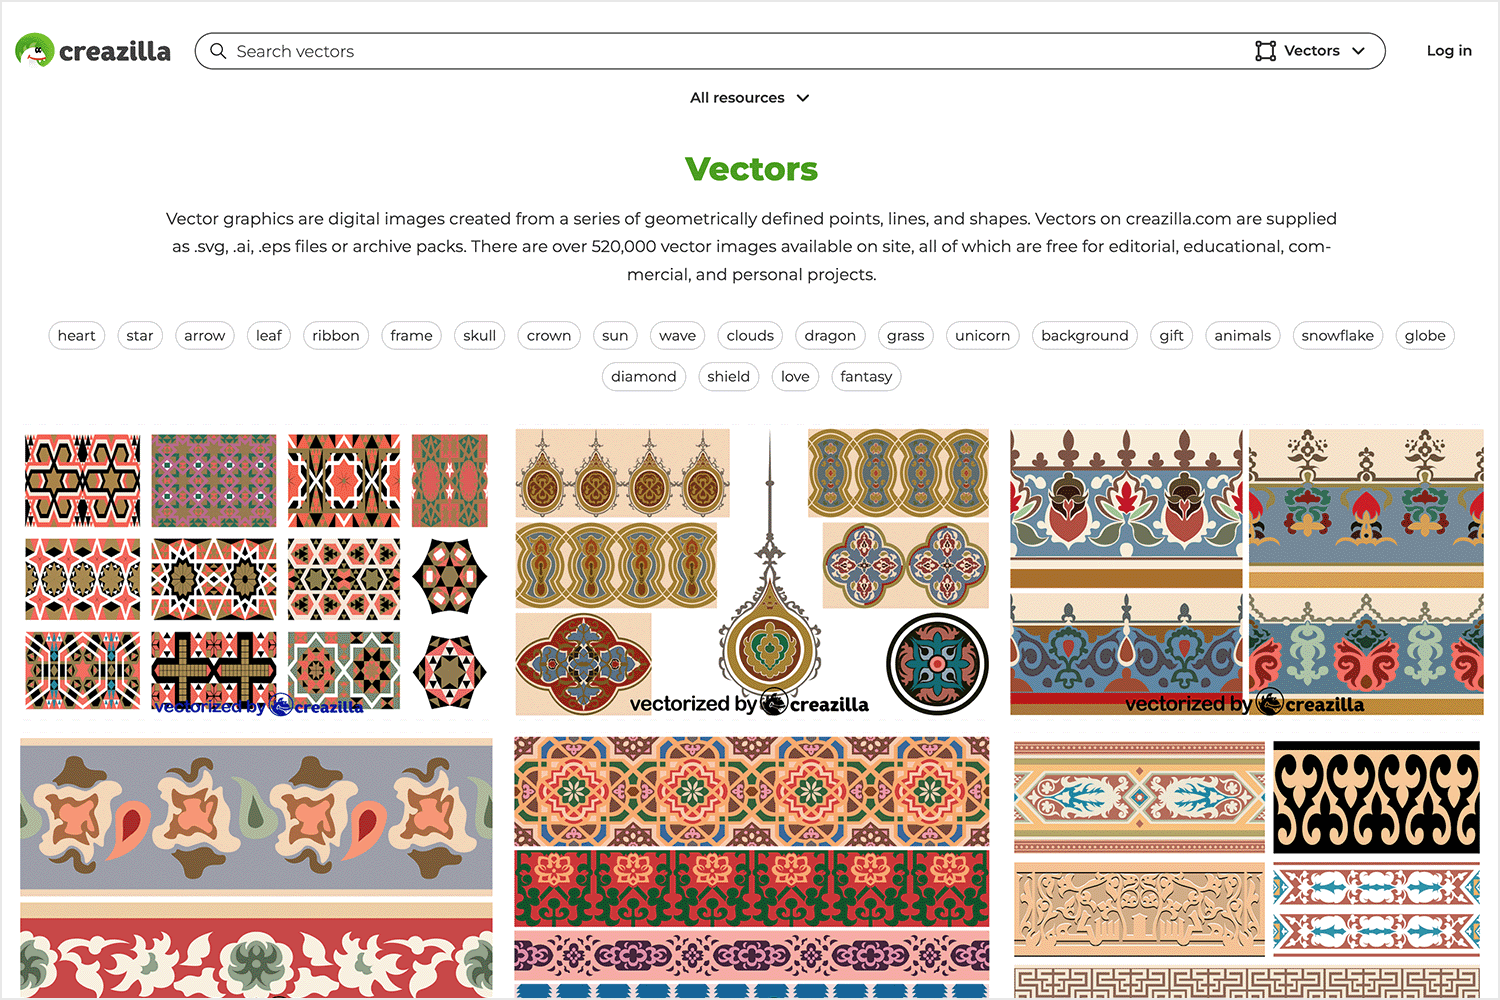 Creazilla homepage with a huge collection of free vector images